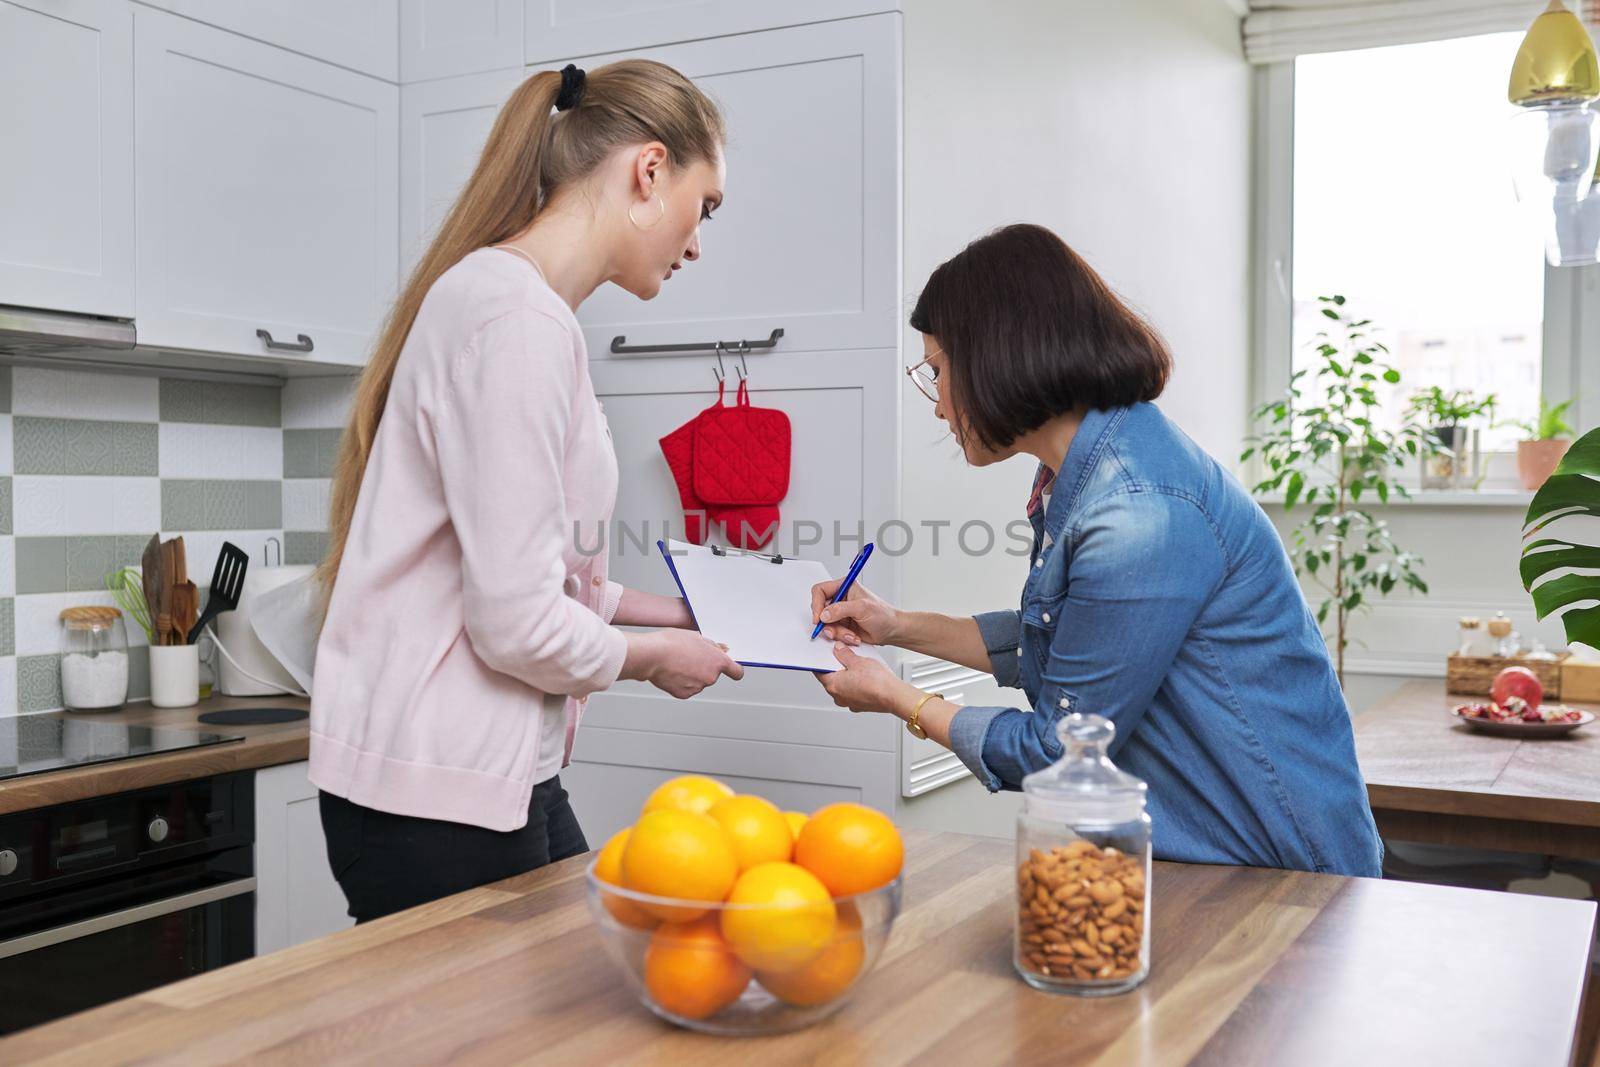 Poll, interview, monitoring, visitor young woman social worker talking and interrogating mature woman housewife, home kitchen interior background